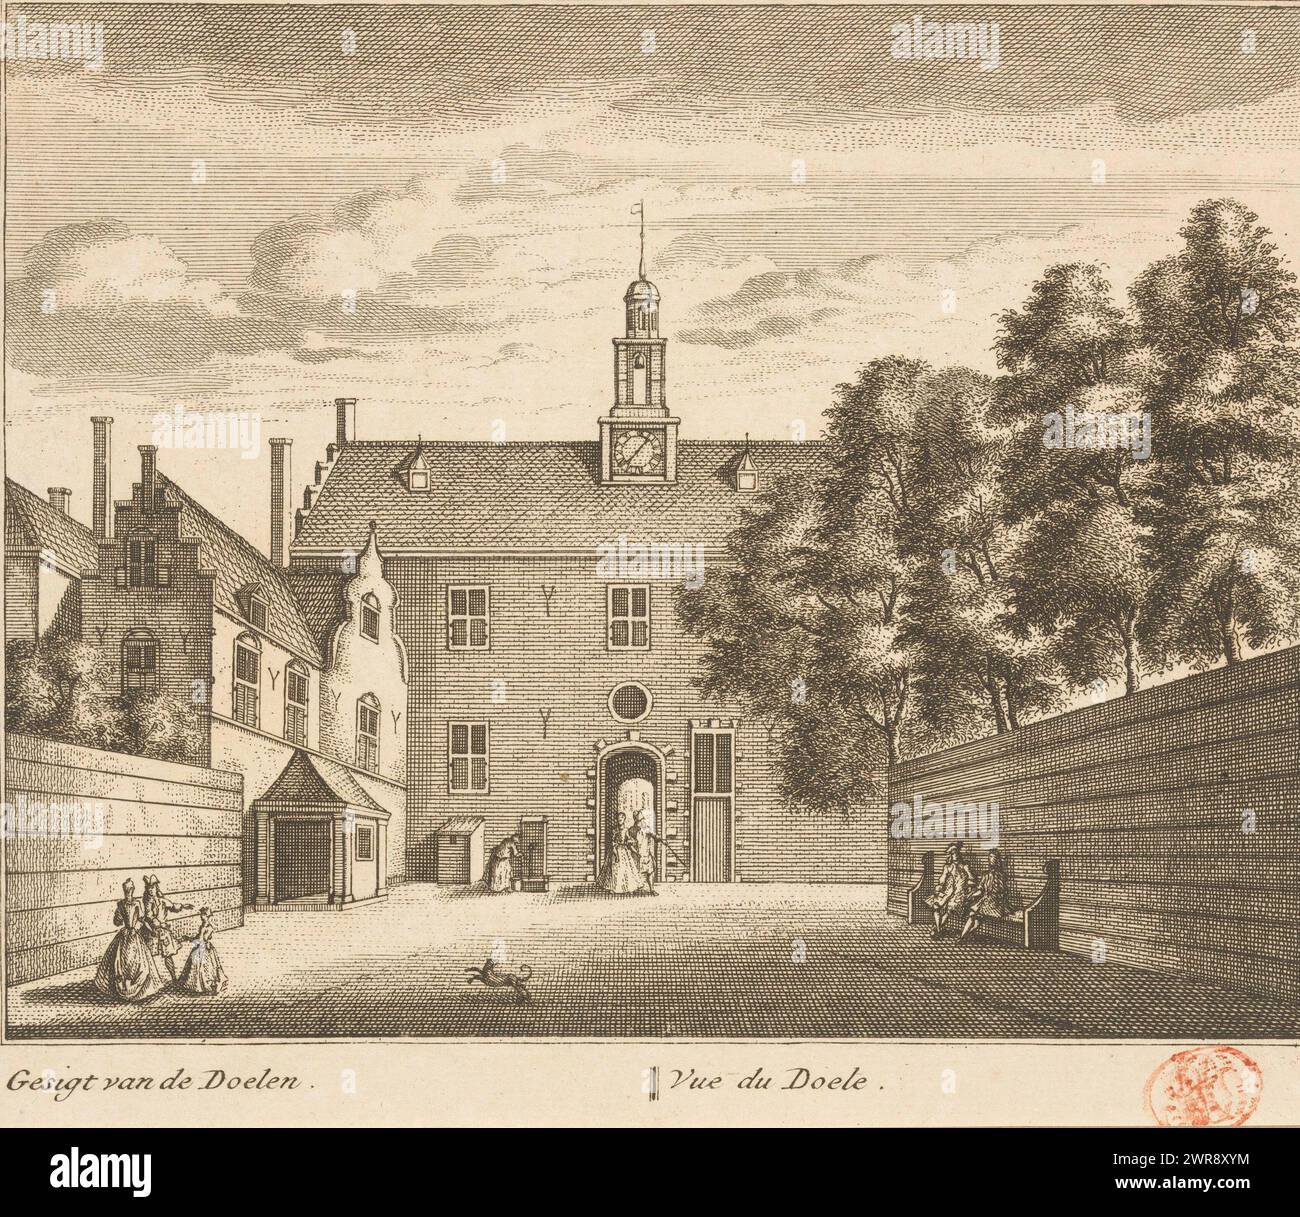 View of the Kloveniersdoelen in Dordrecht where the National Synod was held in 1618-1619, View of the Schutters Doelen where the Sinode was held in the years 1618 and 1619 / Vue du Doele, où le Synode s'est tenu en 1618 et 1619 ( title on object), View of the Kloveniersdoelen in Dordrecht where the National Synod was held in the years 1618-1619 (Synod of Dordrecht). In the foreground a stall and some passers-by., print maker: Leonard Schenk, after drawing by: Abraham Rademaker, publisher: Leonard Schenk, (possibly), Amsterdam, 1736, paper, etching, engraving, height 171 mm, width 201 mm Stock Photo